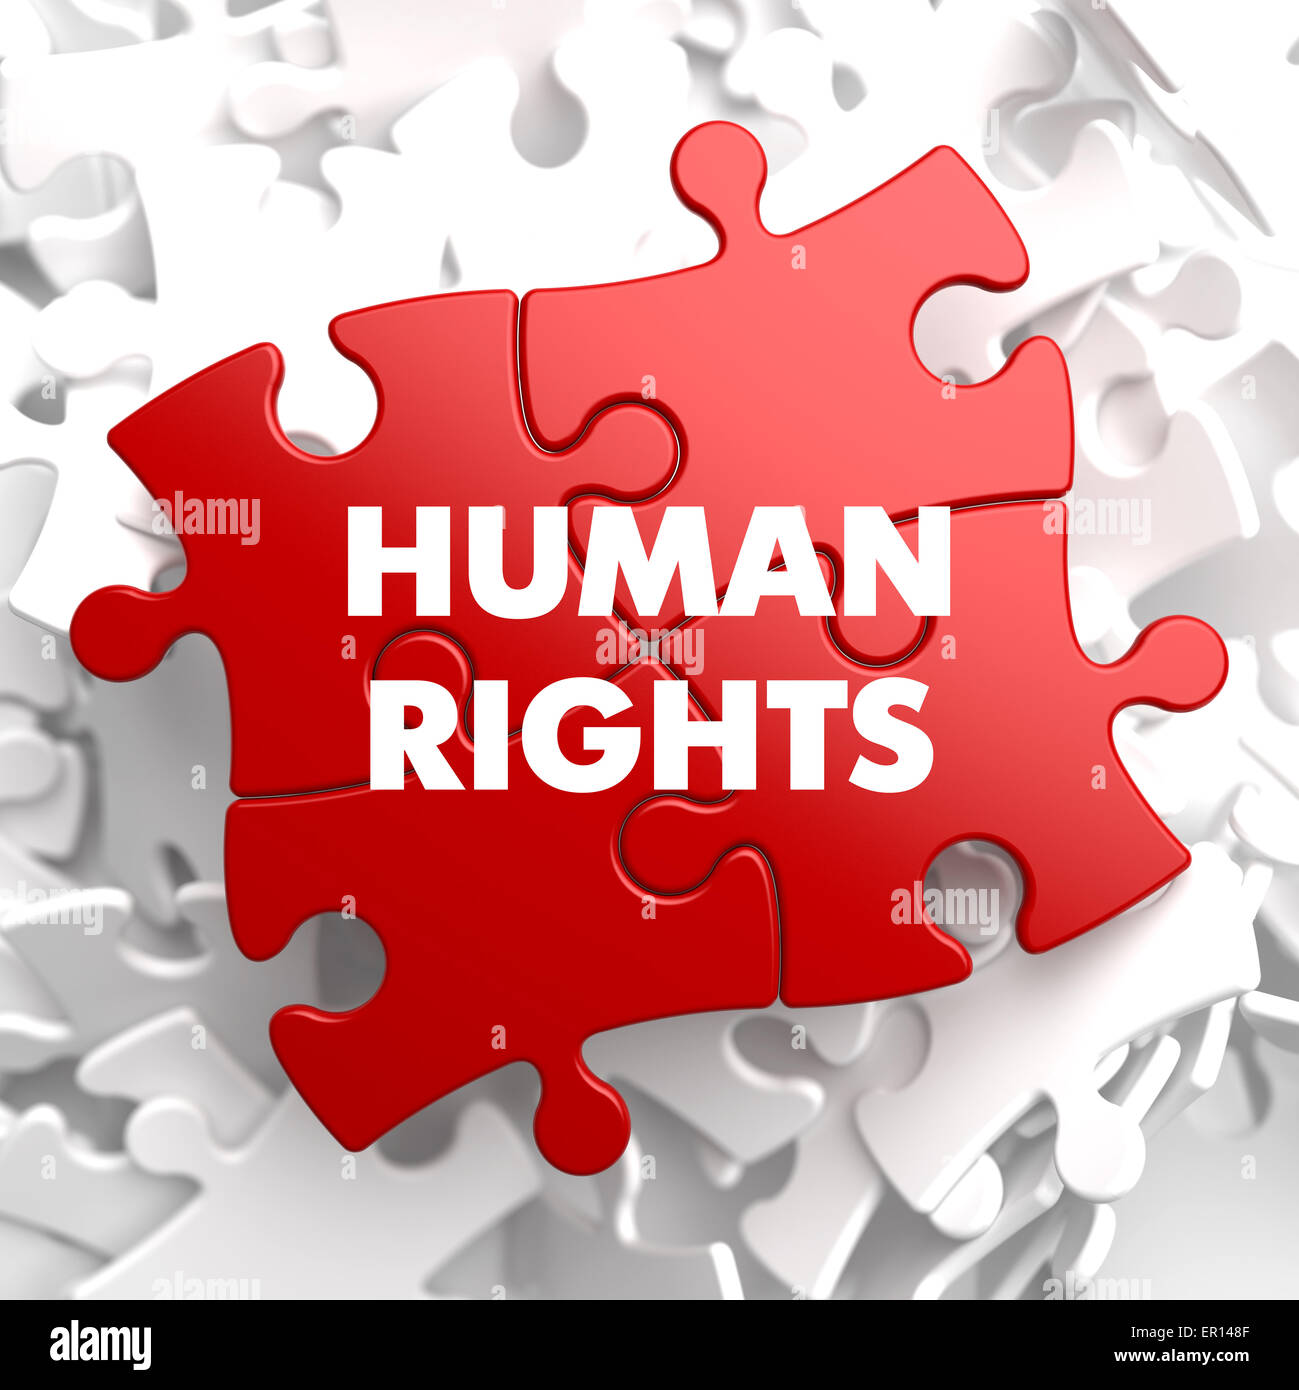 Human Rights on Red Puzzle. Stock Photo